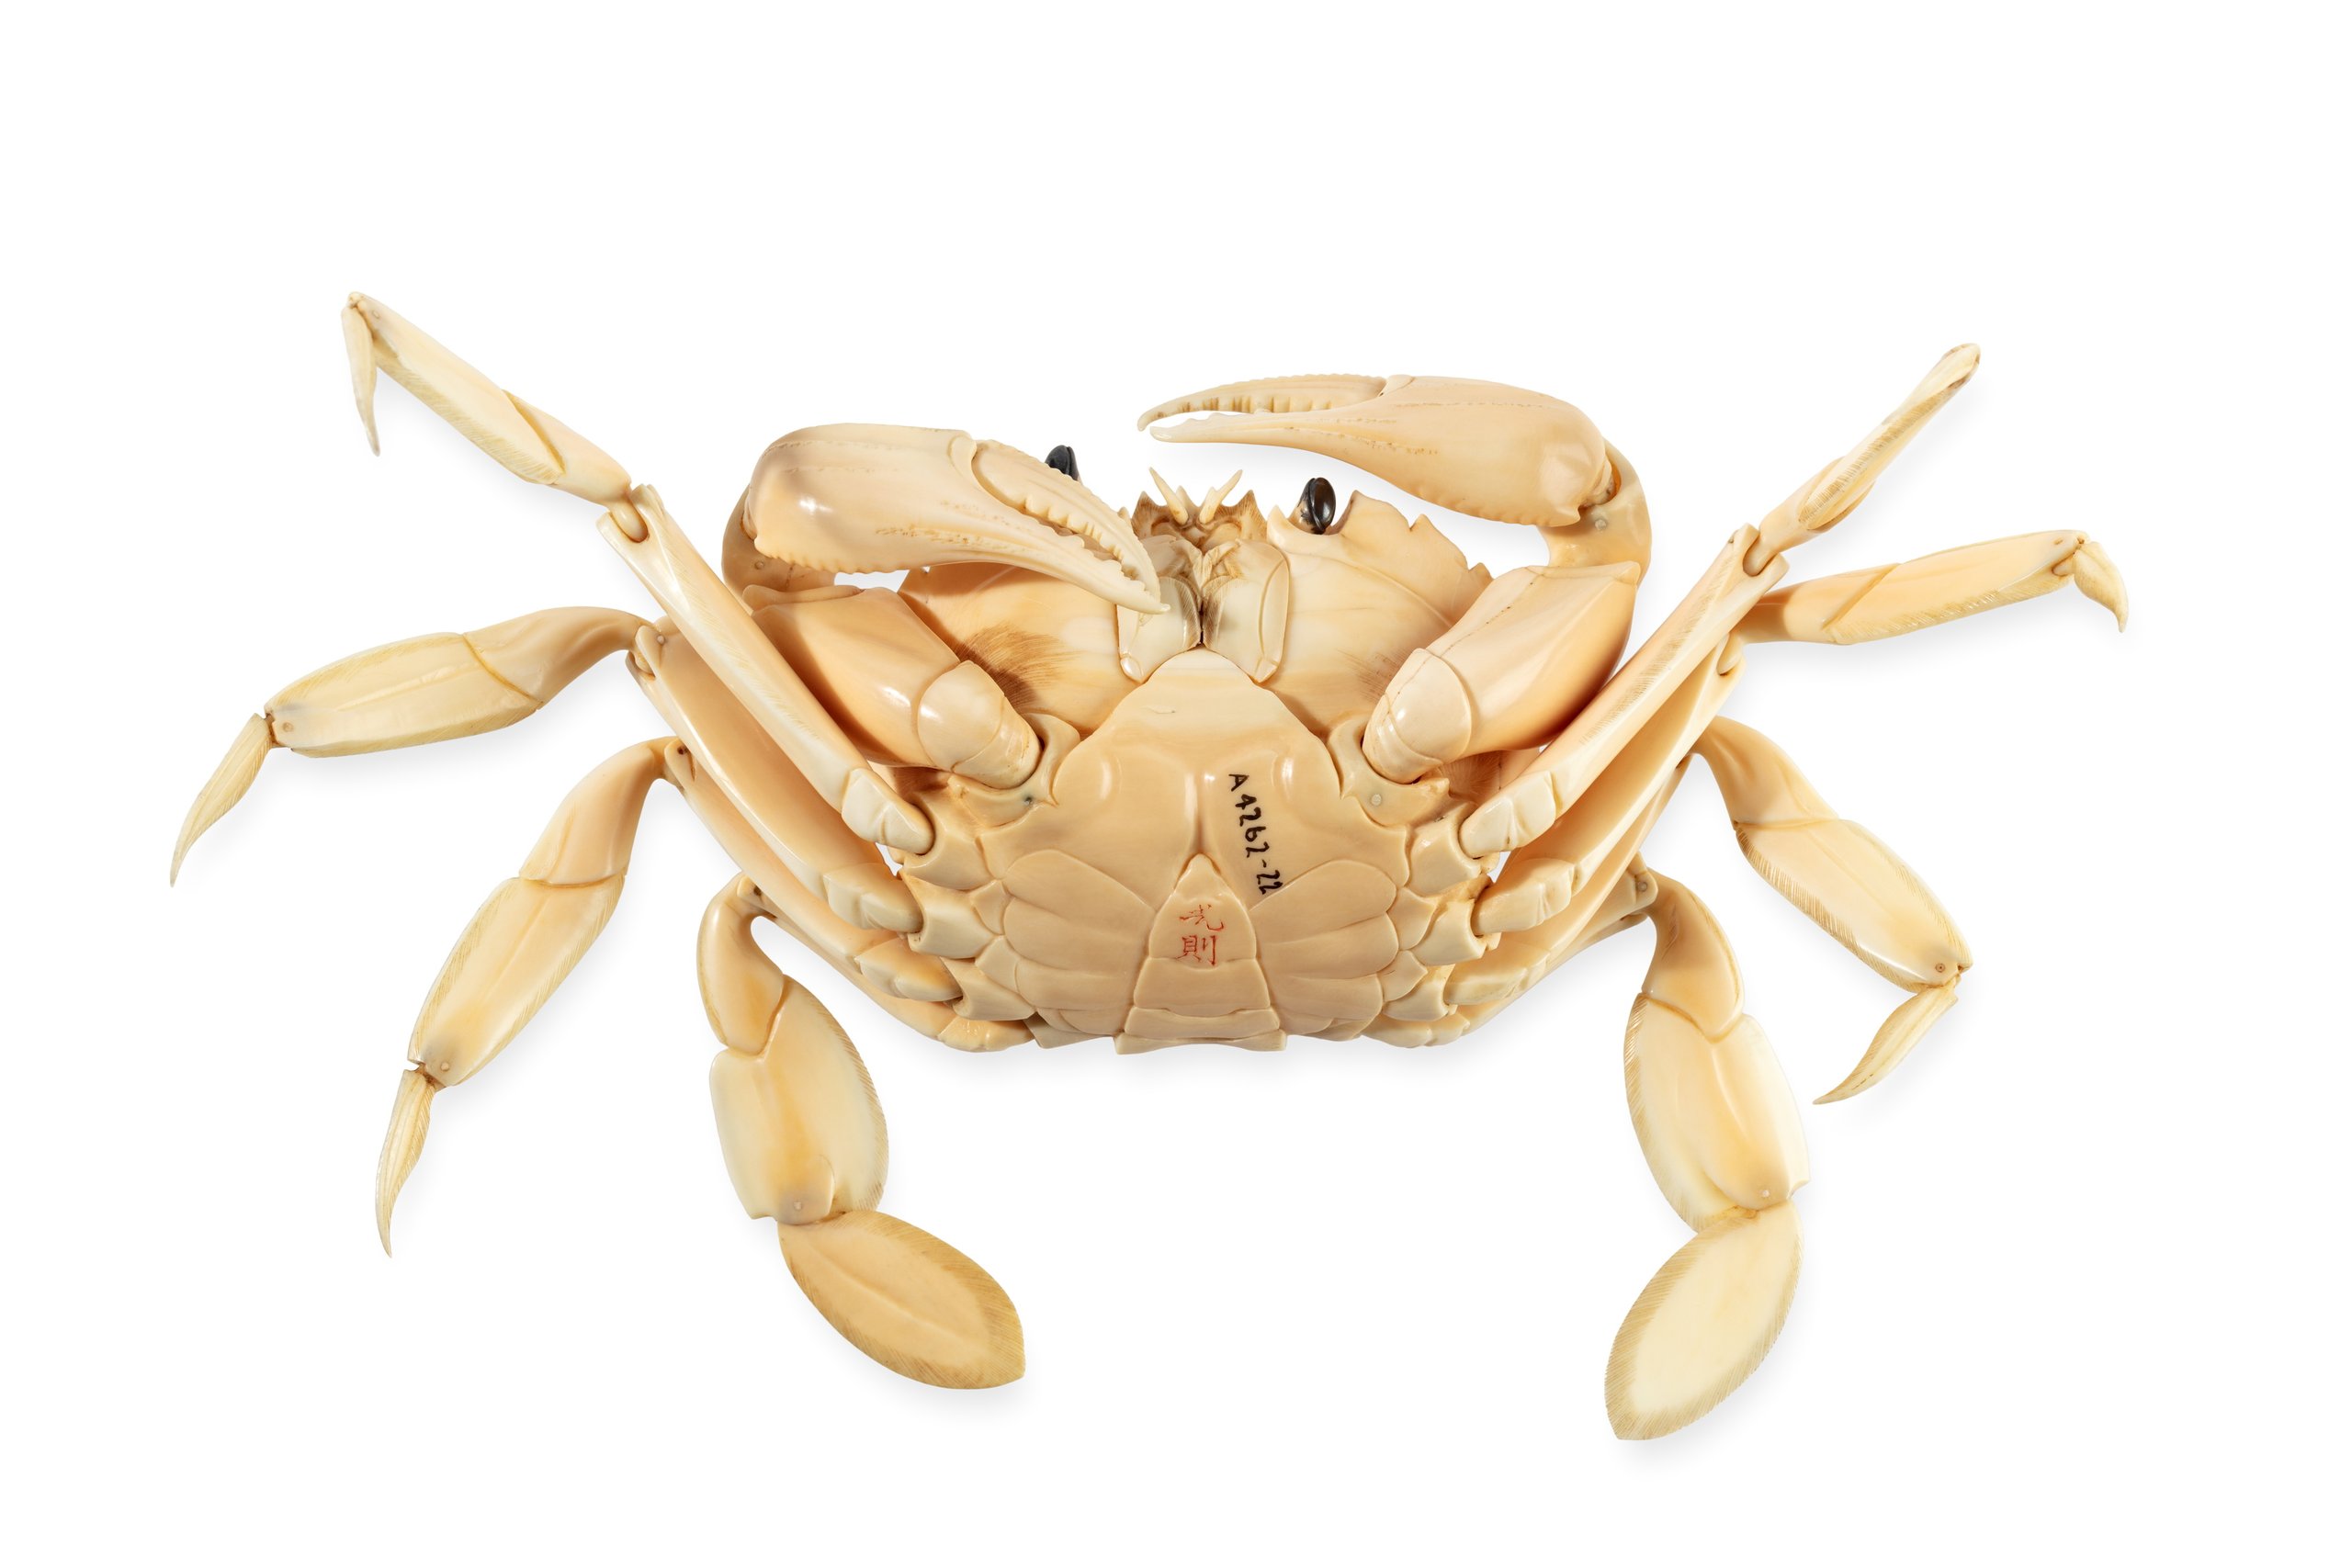 Carved ivory crab figure